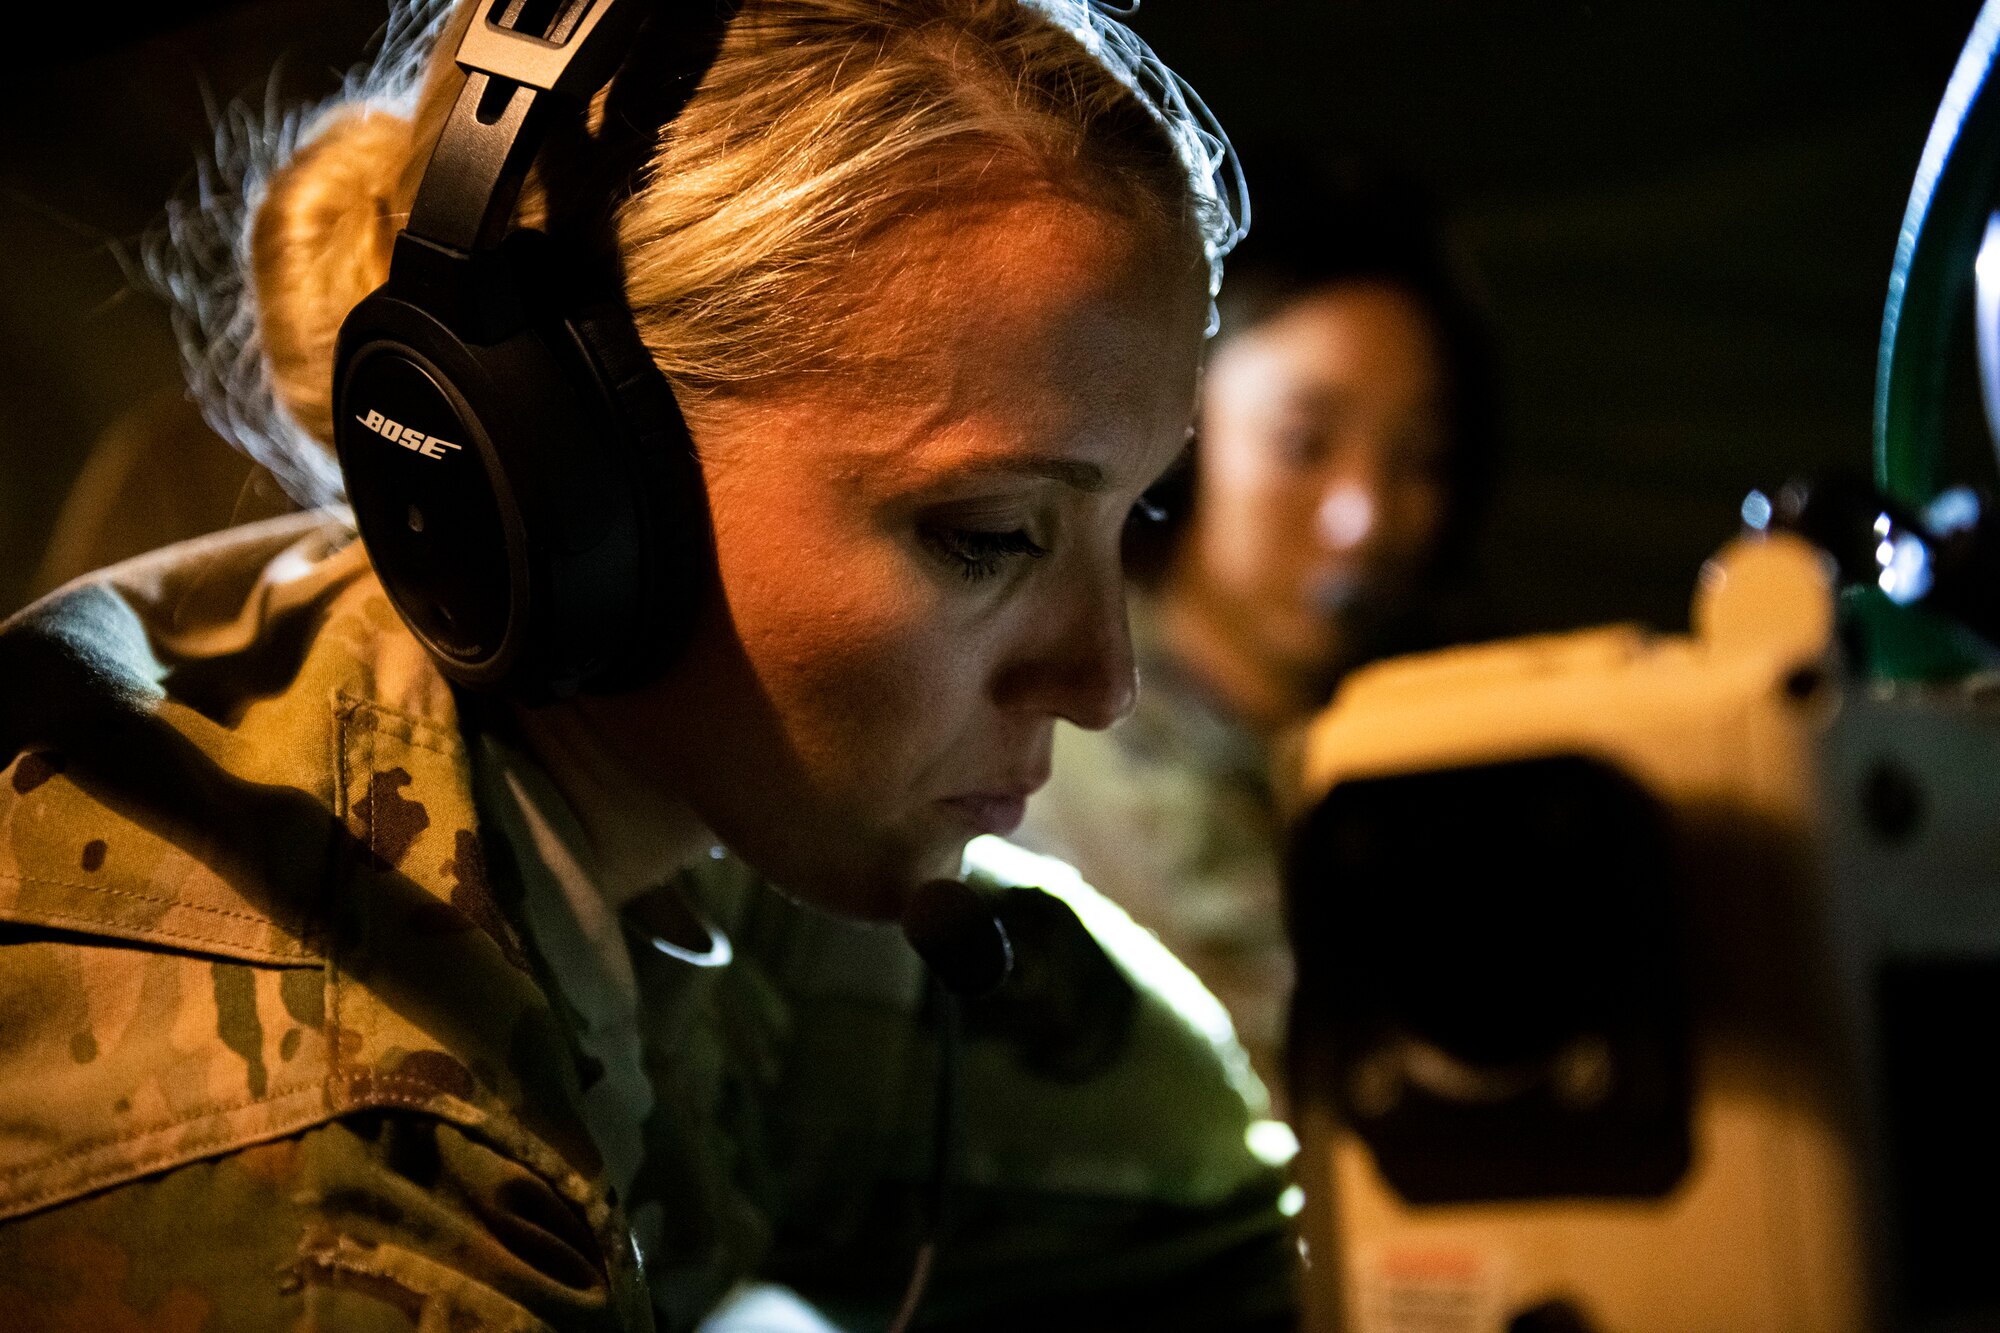 Female service member works on medical equipment with headset on.